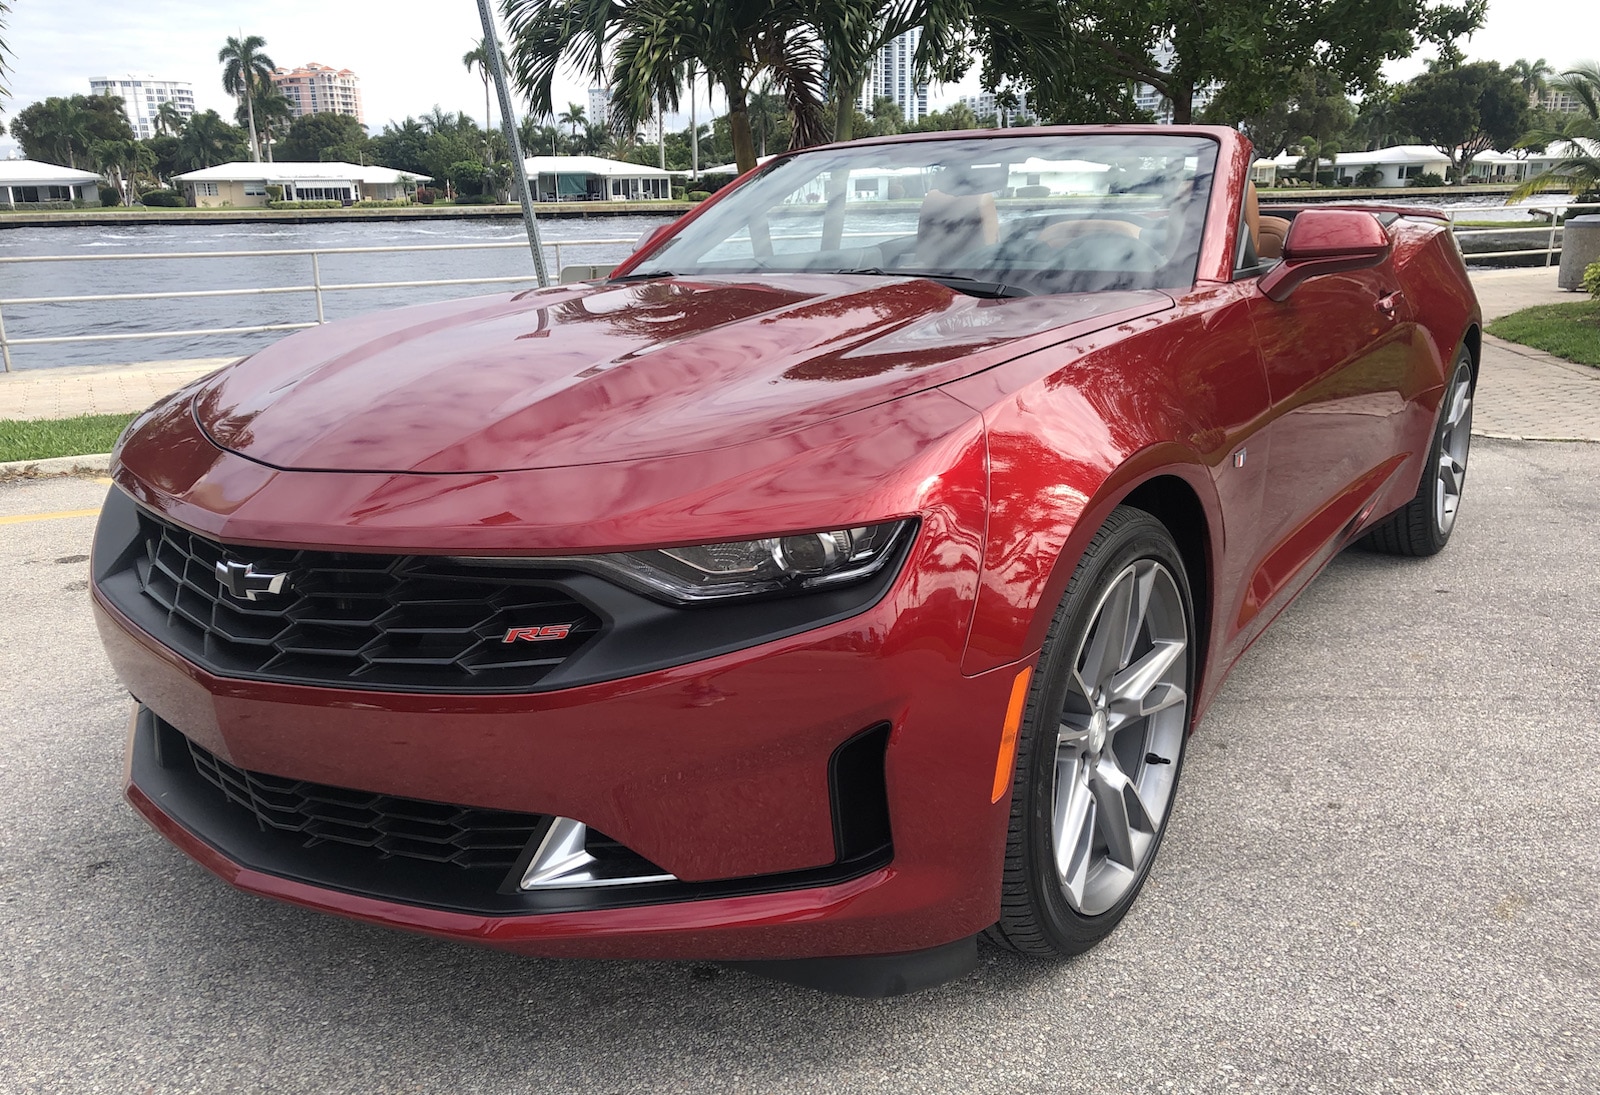 A Week With: 2021 Chevrolet Camaro RS Convertible - The Detroit Bureau